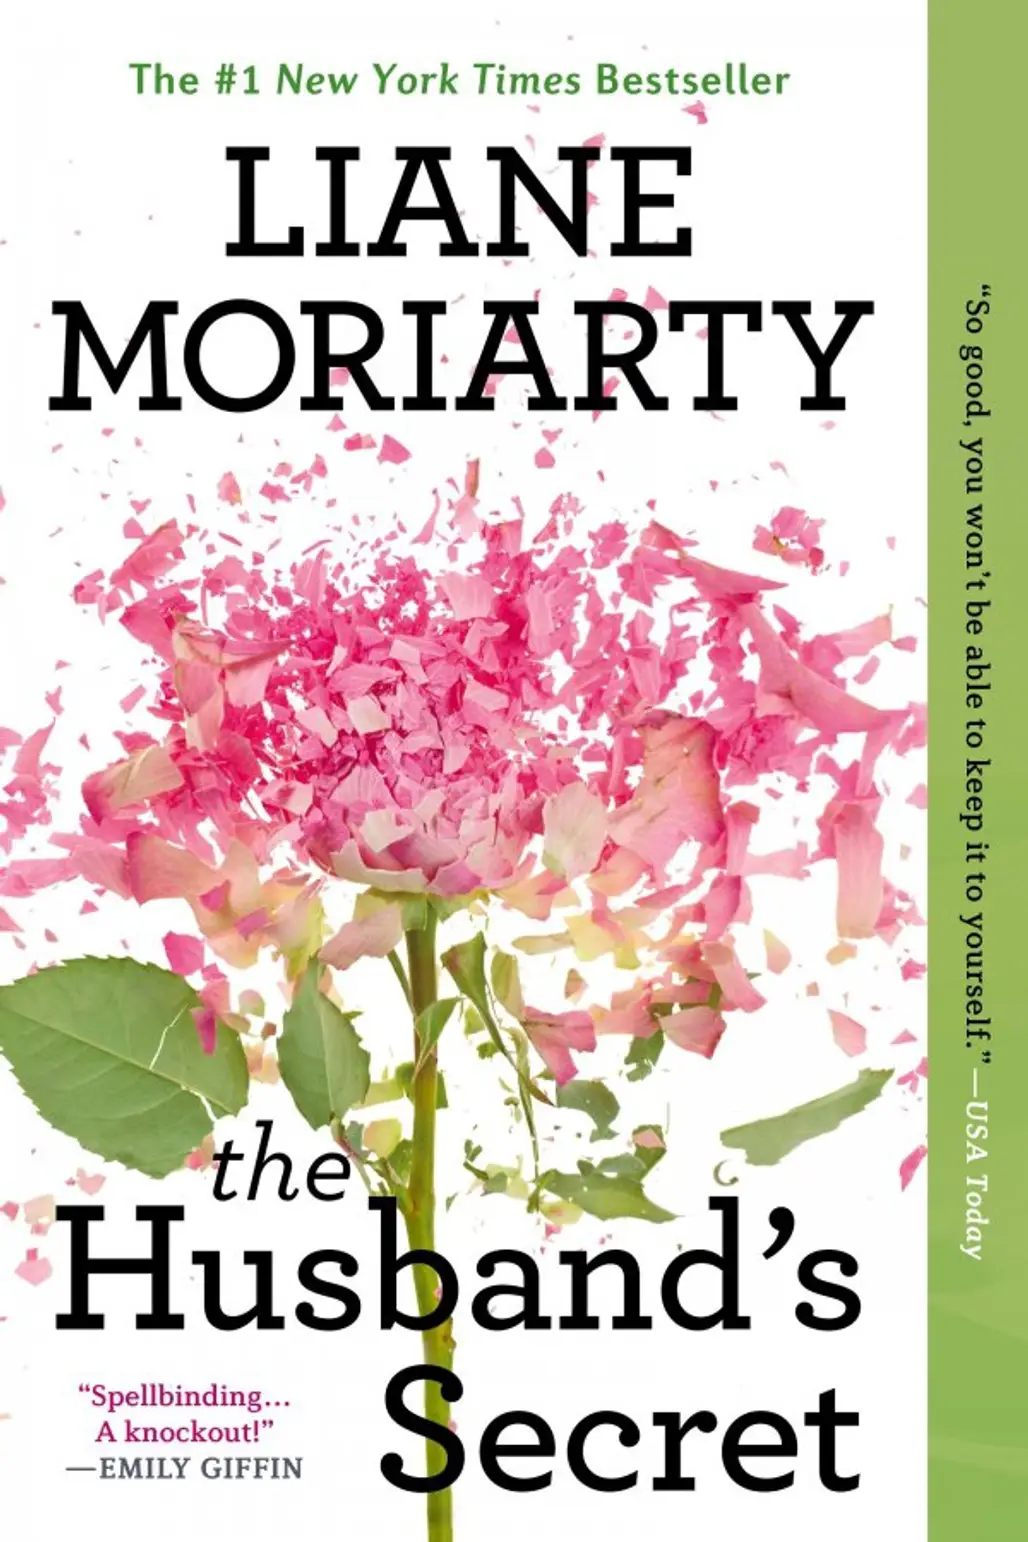 The Husband's Secret by Liane Moriarty